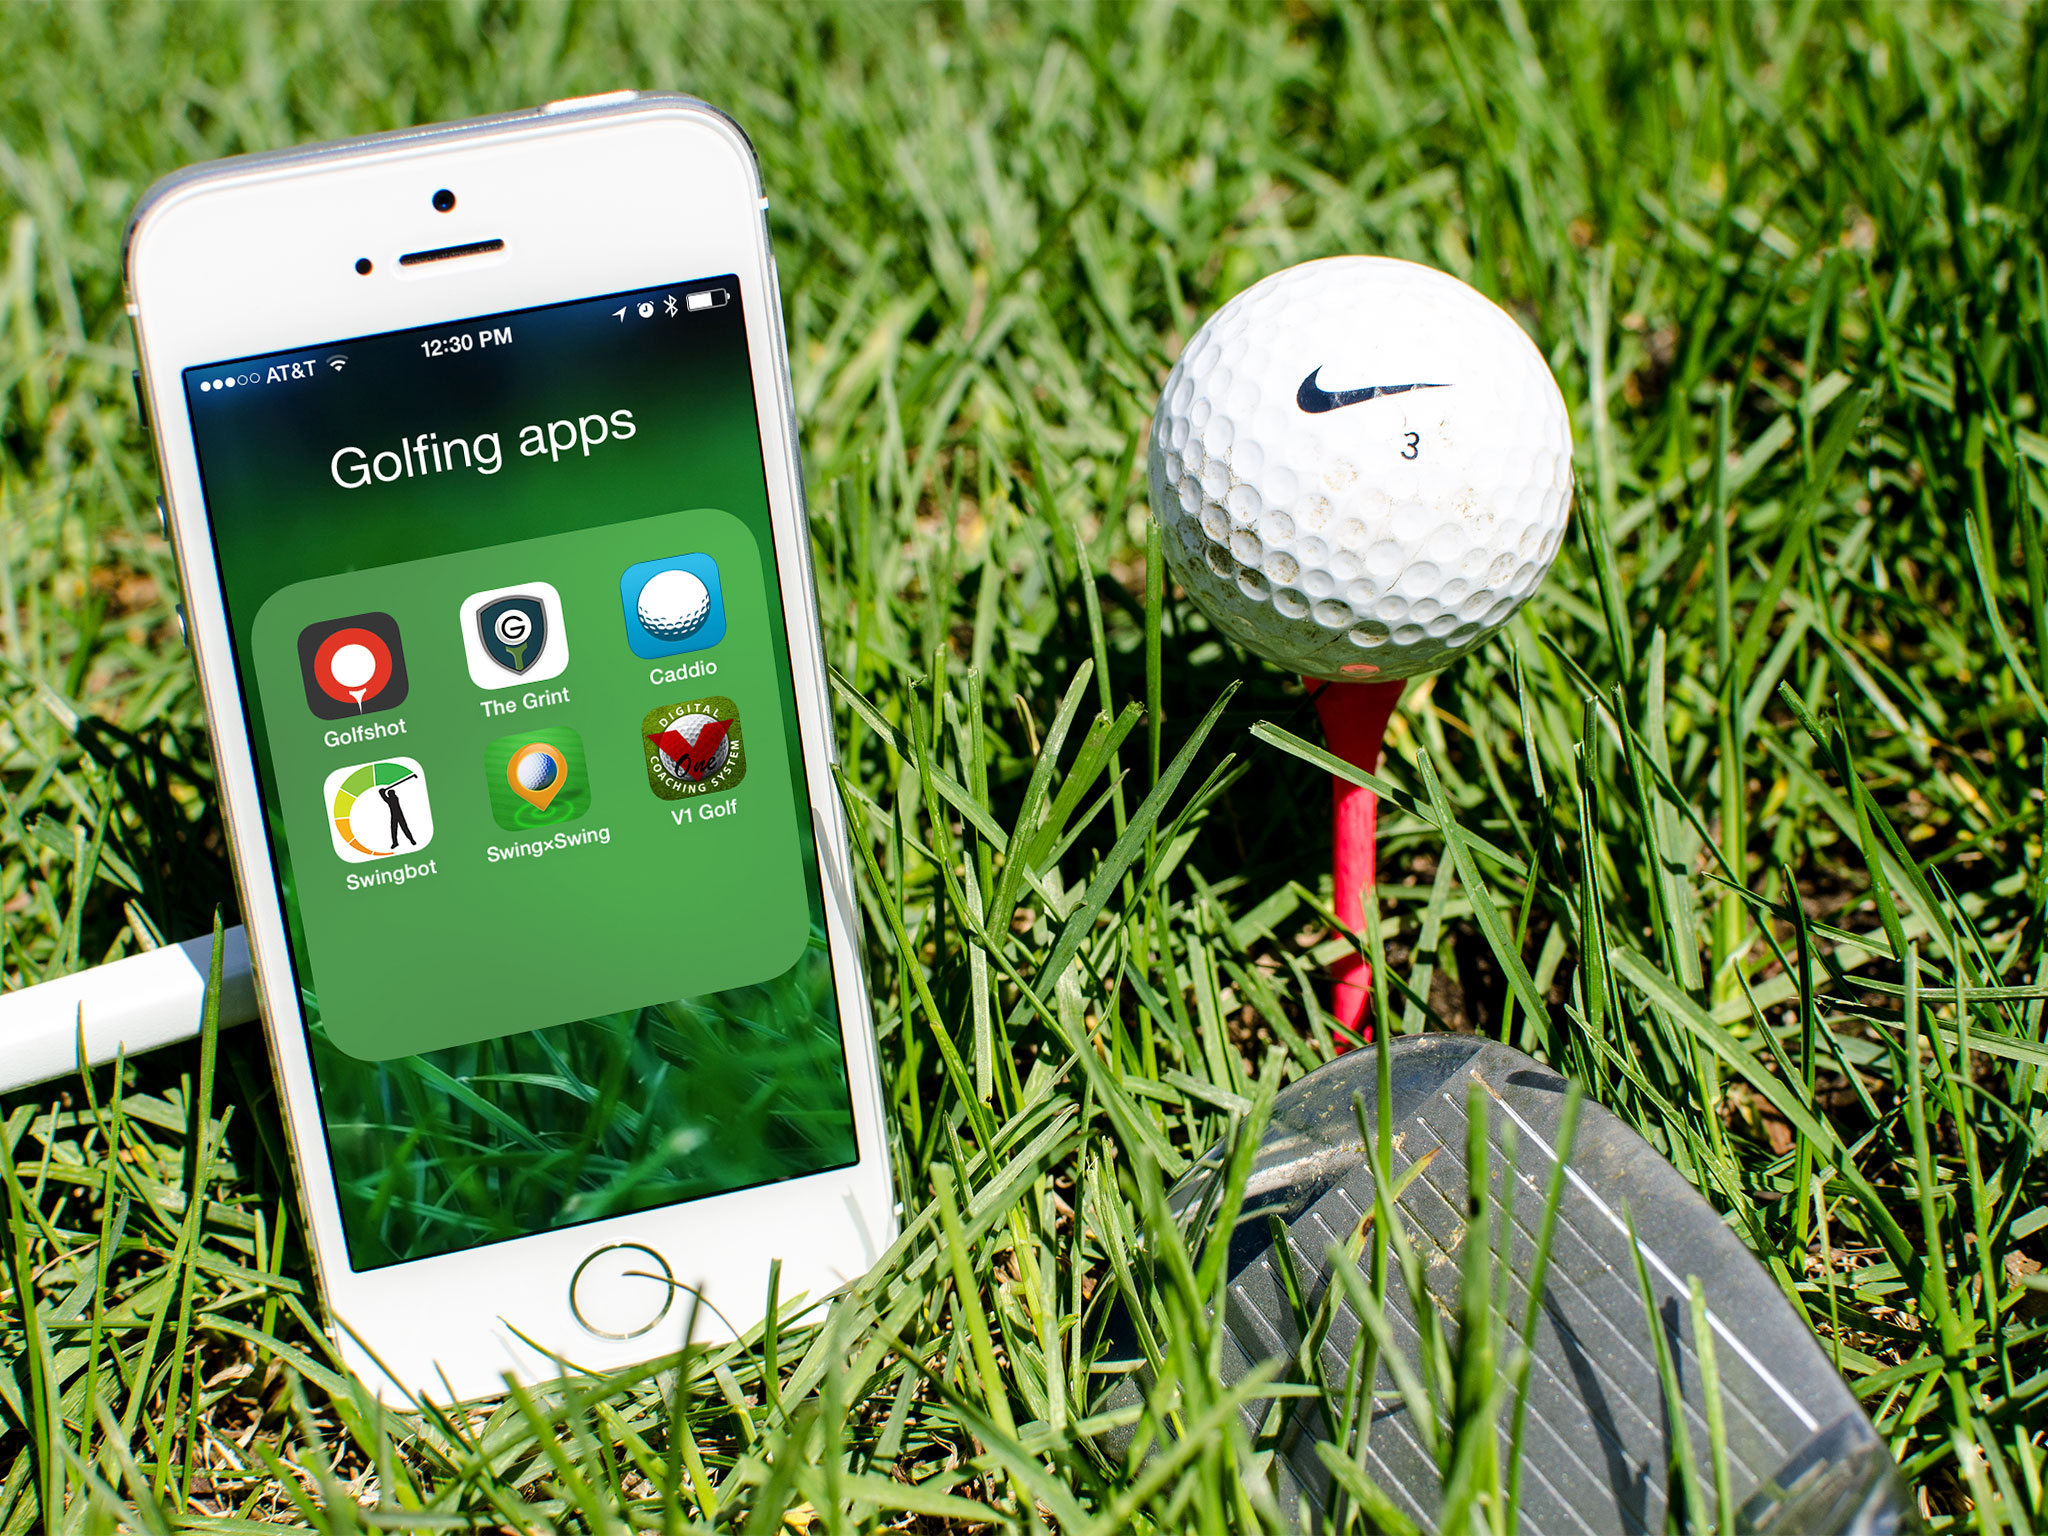 Best golfing apps for iPhone: Swingbot, Golfshot GPS, Caddio, and more!